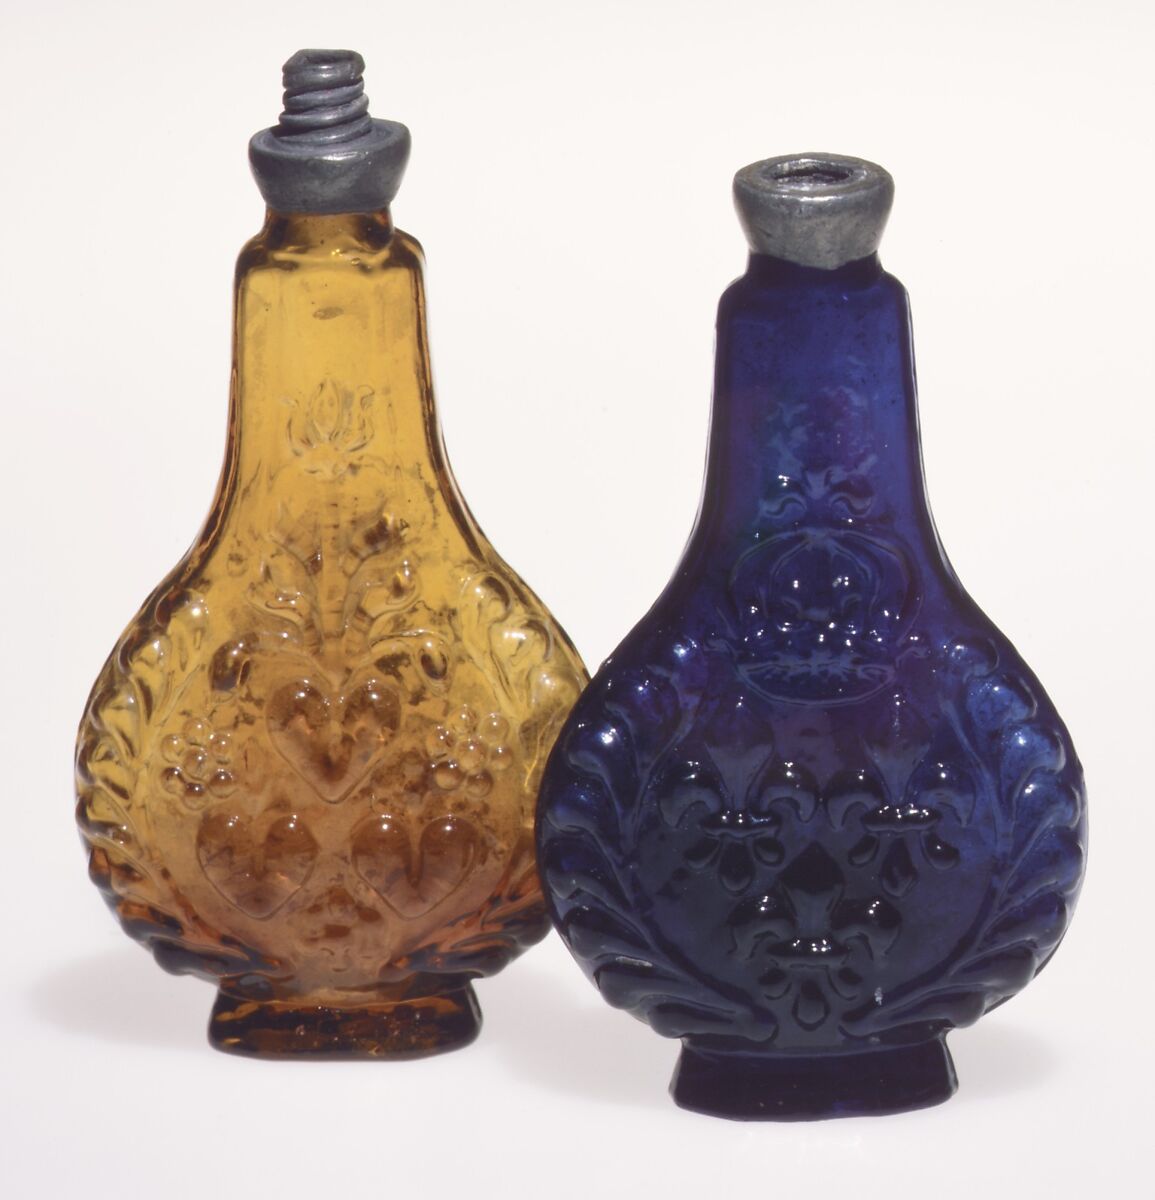 Amber-colored flacon de poche decorated with fleur de lys and hearts, Glasshouse of Bernard Perrot, Verrerie Royale d&#39;Orléans (1640–1709), Glass, pewter, French, Orléans 